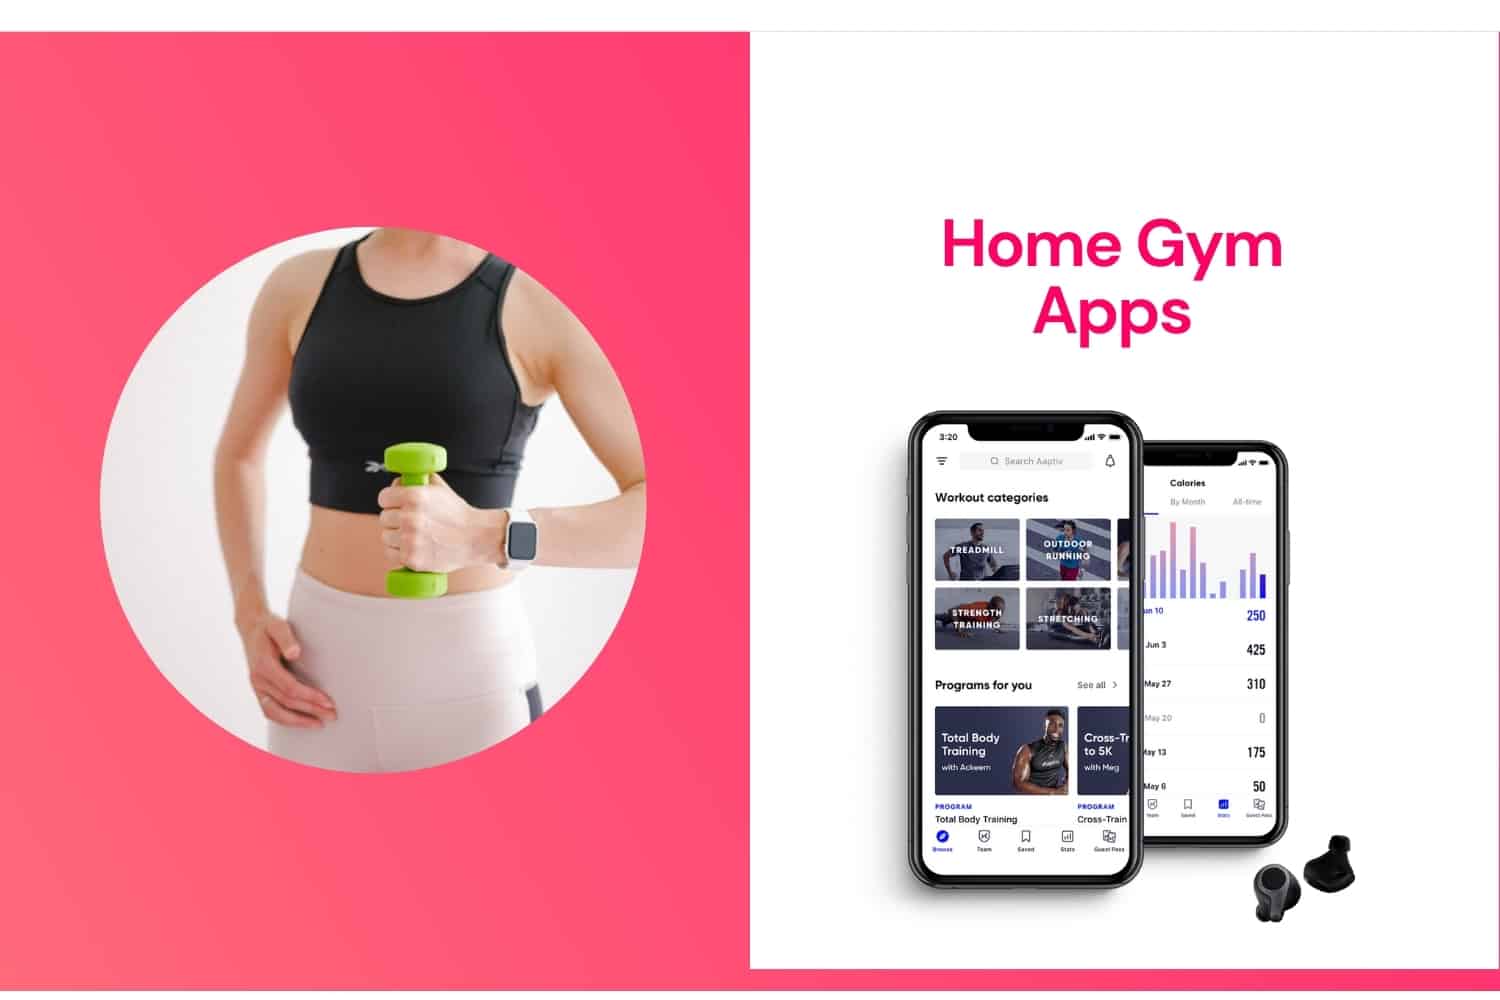 5 Best Home Gym Apps to Track Workout Progress idlGYM